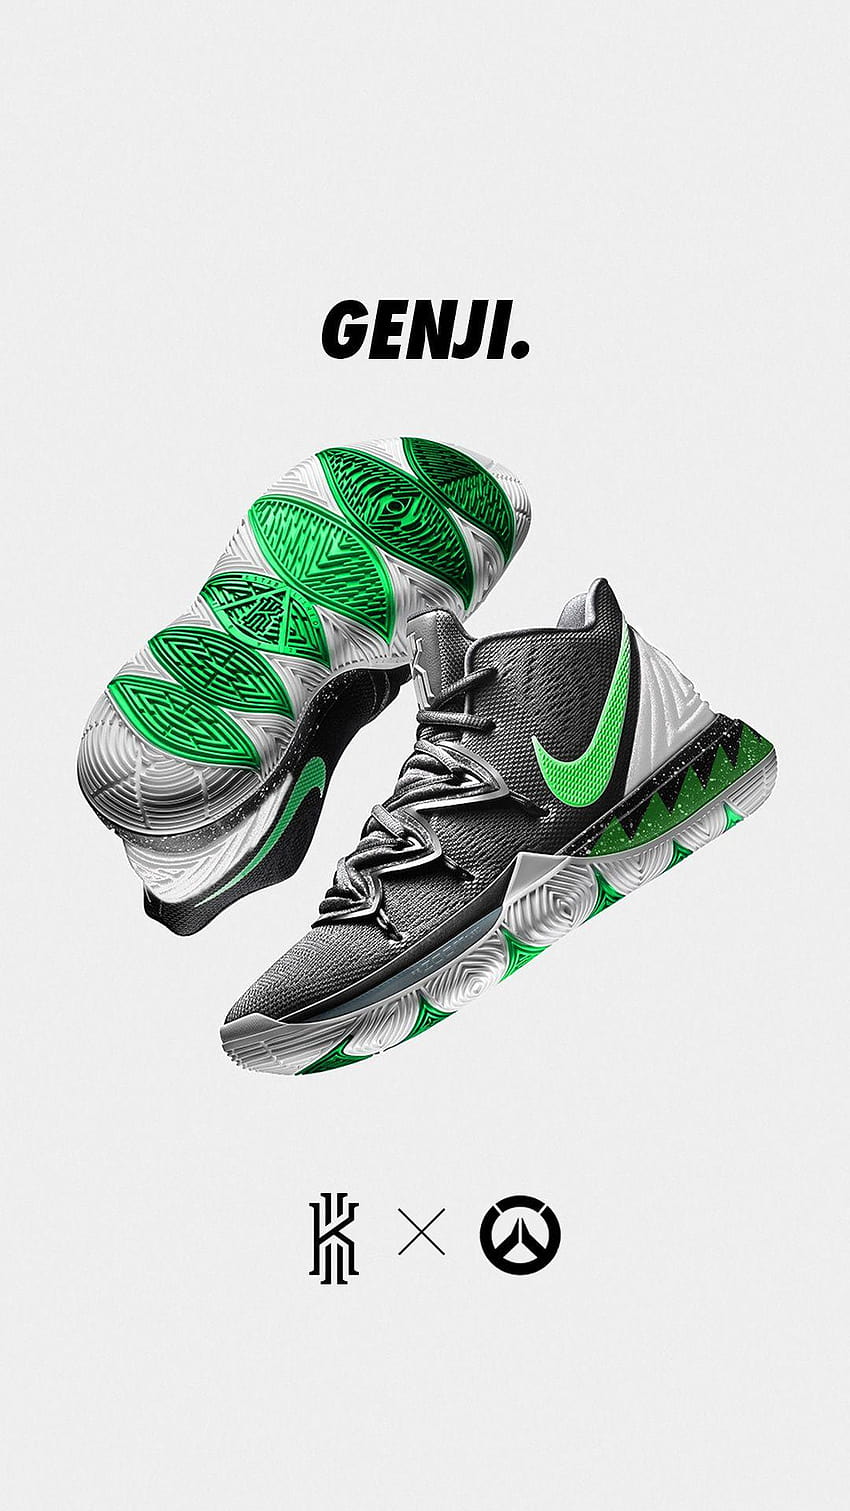 Nike Kyrie 5 X Overwatch Concepts on Behance, kyrie irving logo shoes wallpaper ponsel HD